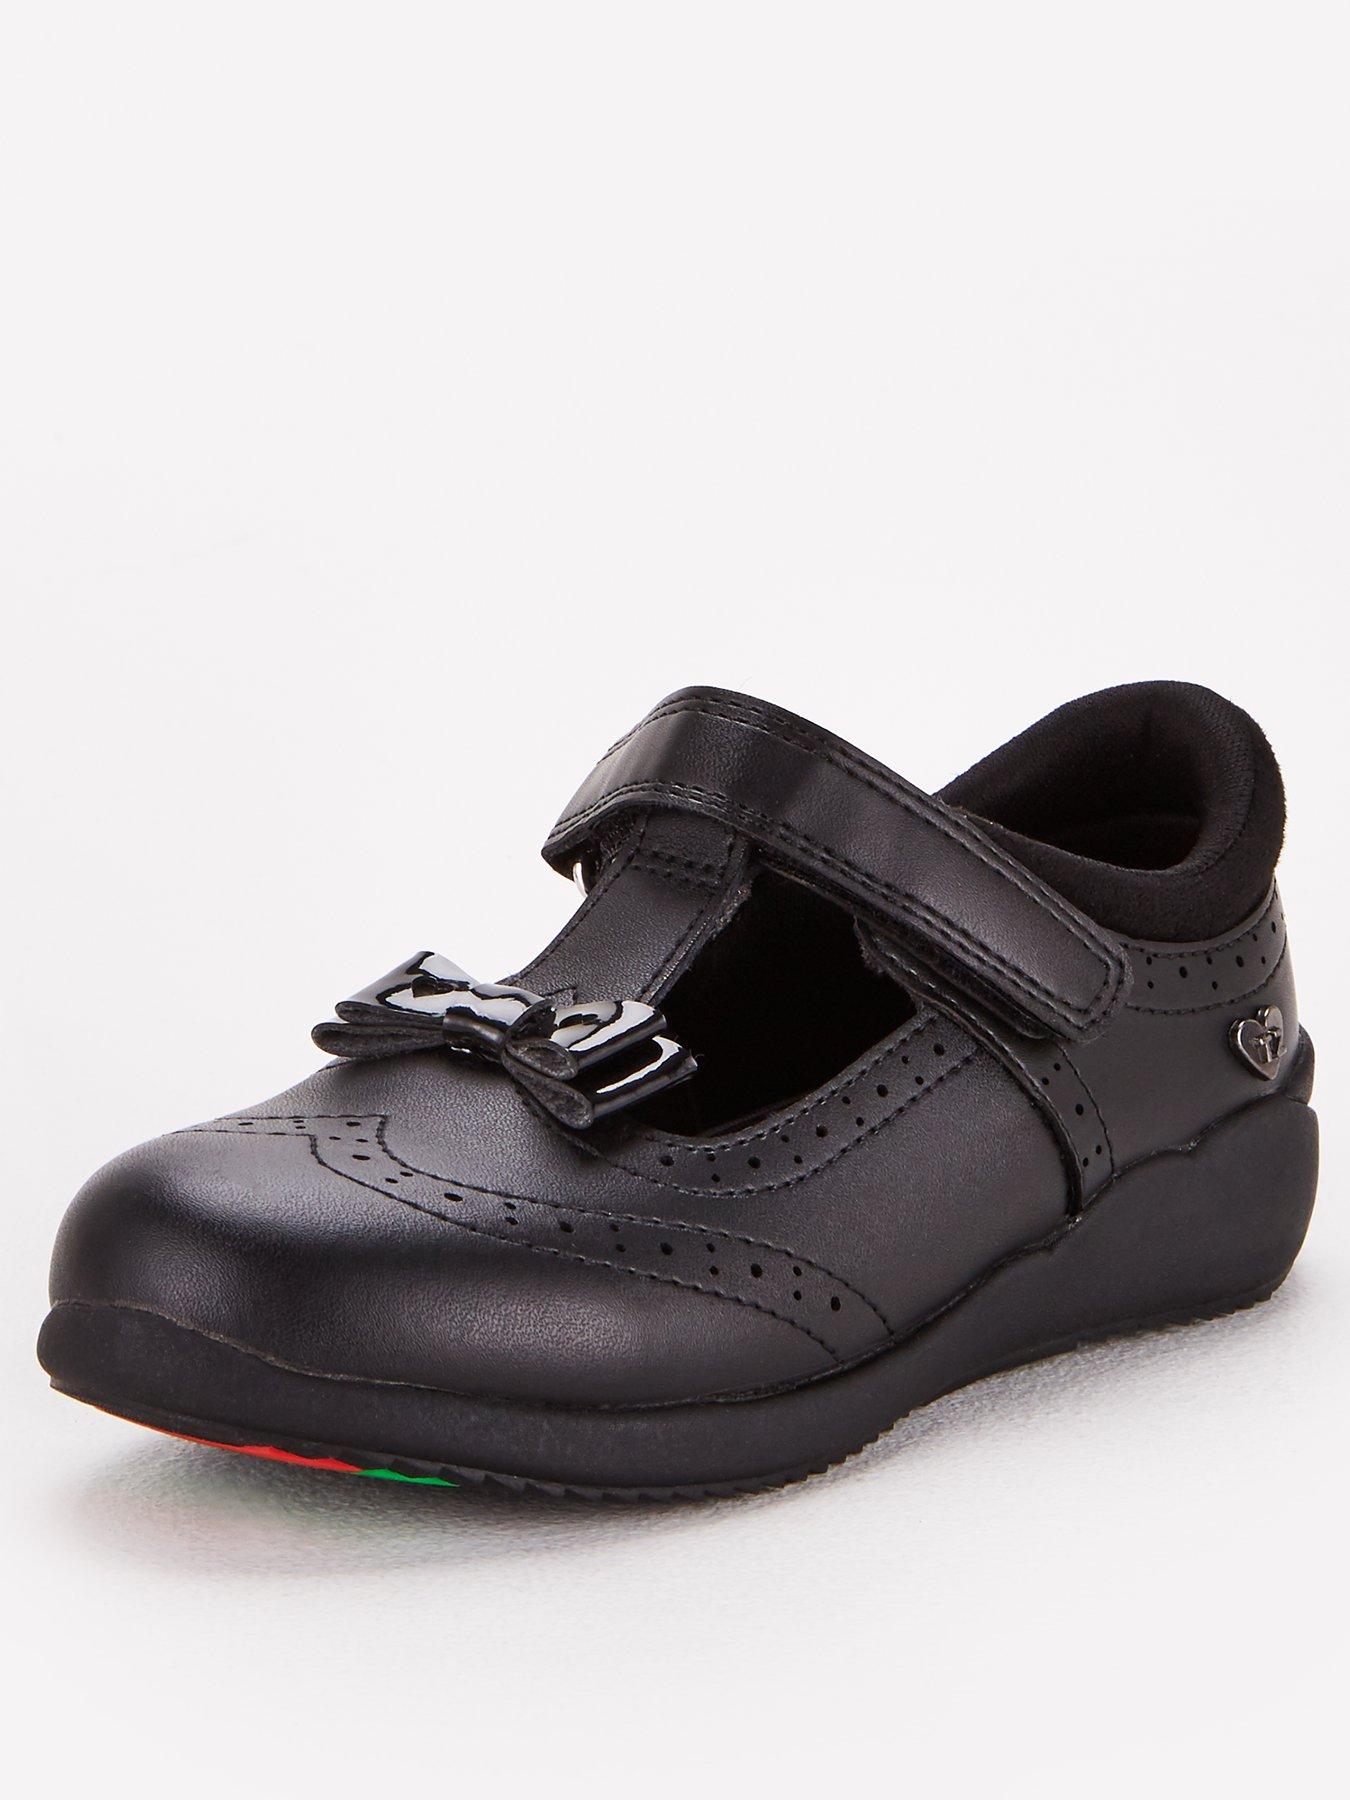  ToeZone at V by Very Girls Brogue Bow Leather School Shoe - Black